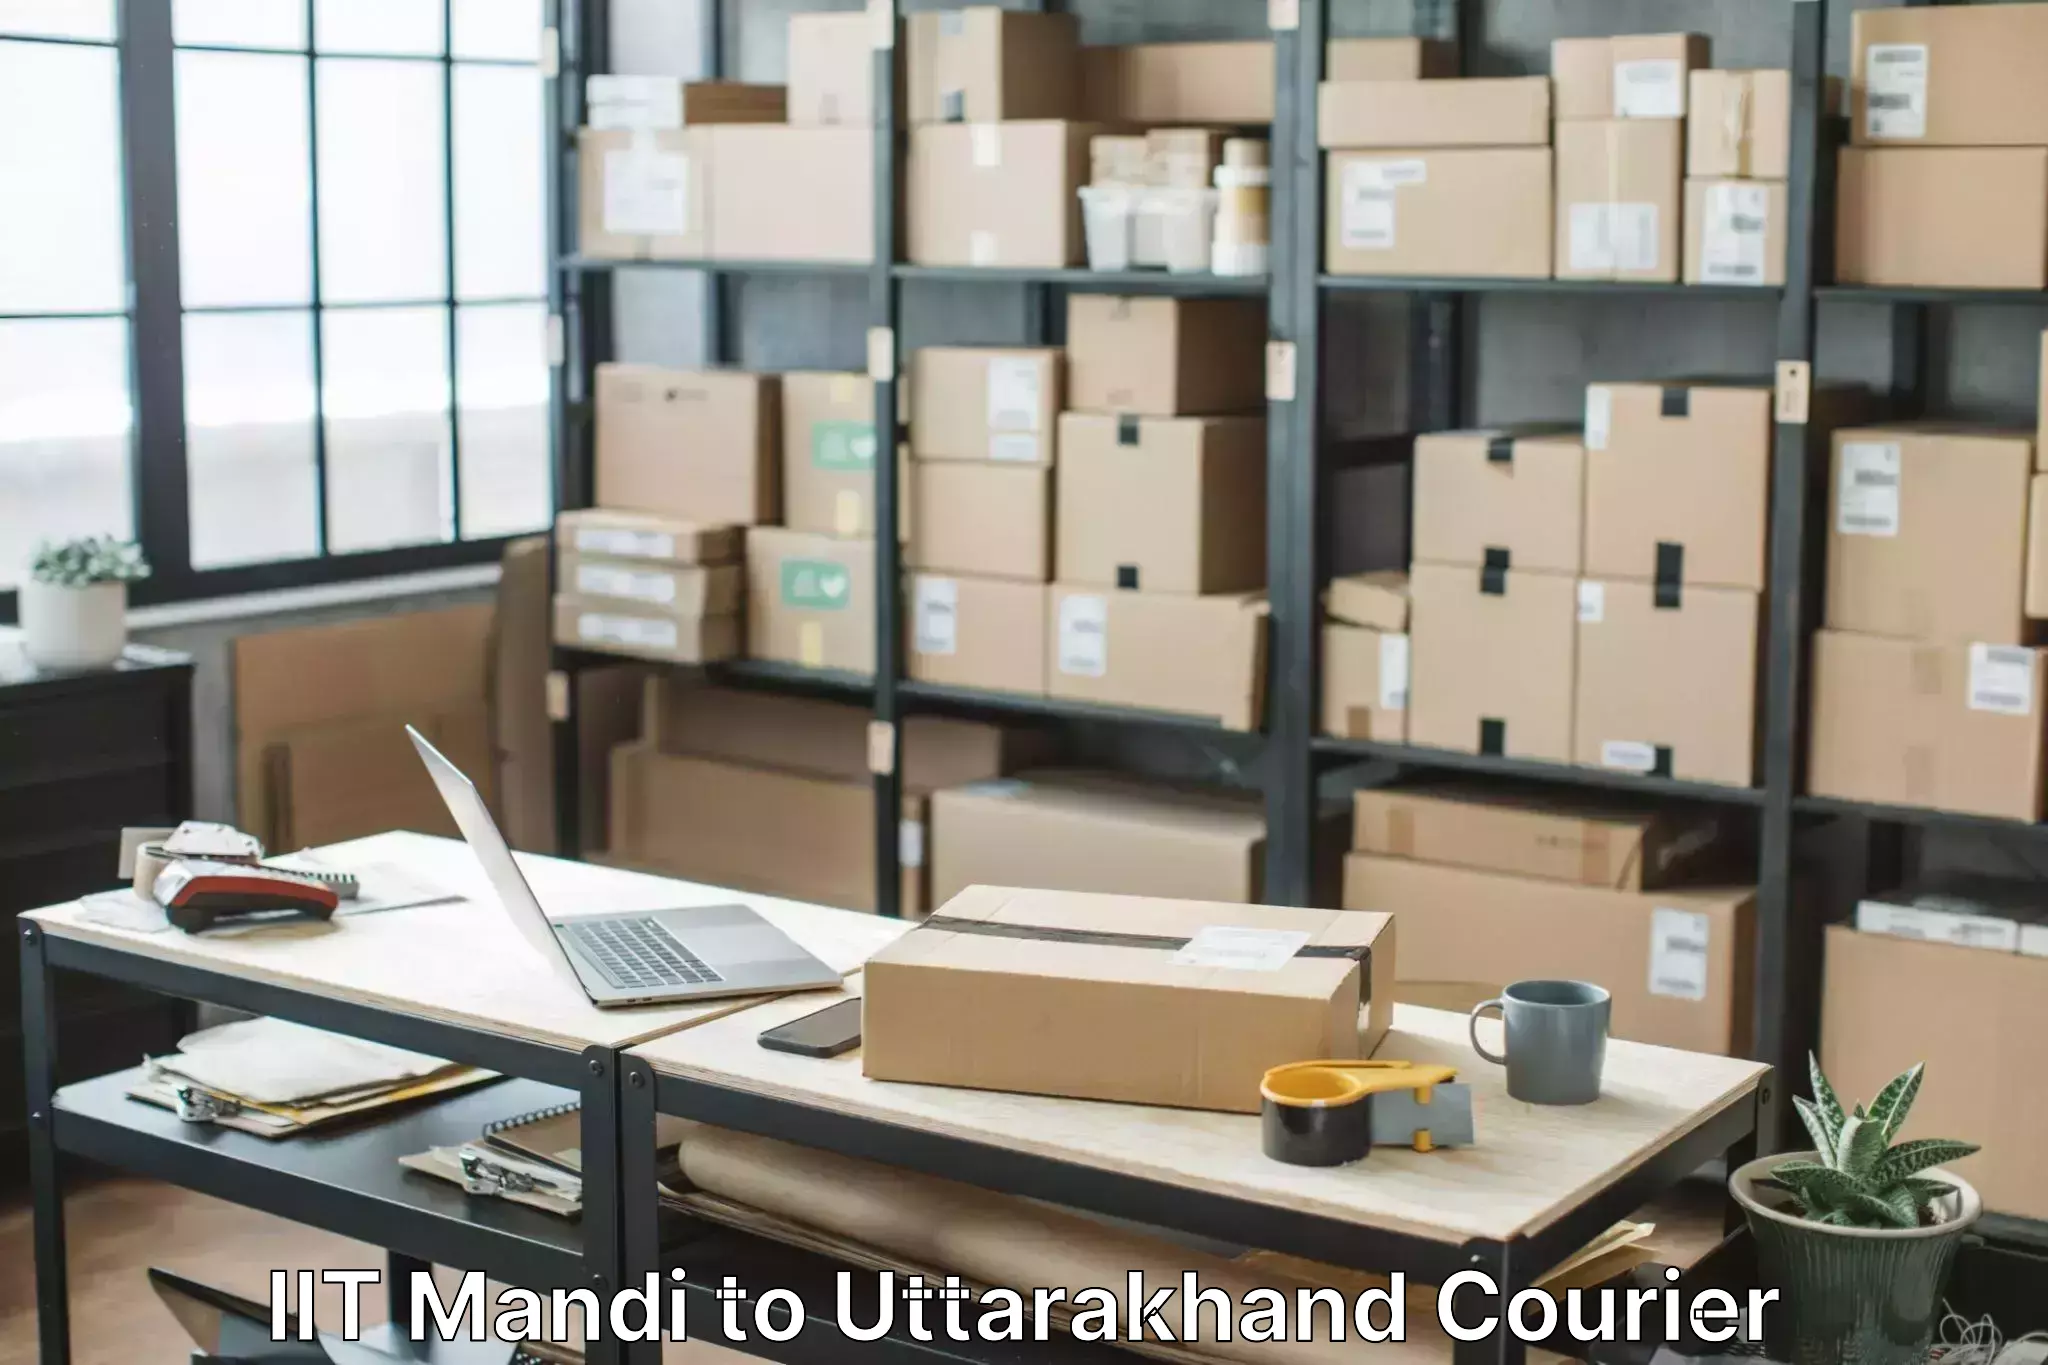 Trusted relocation experts IIT Mandi to Someshwar